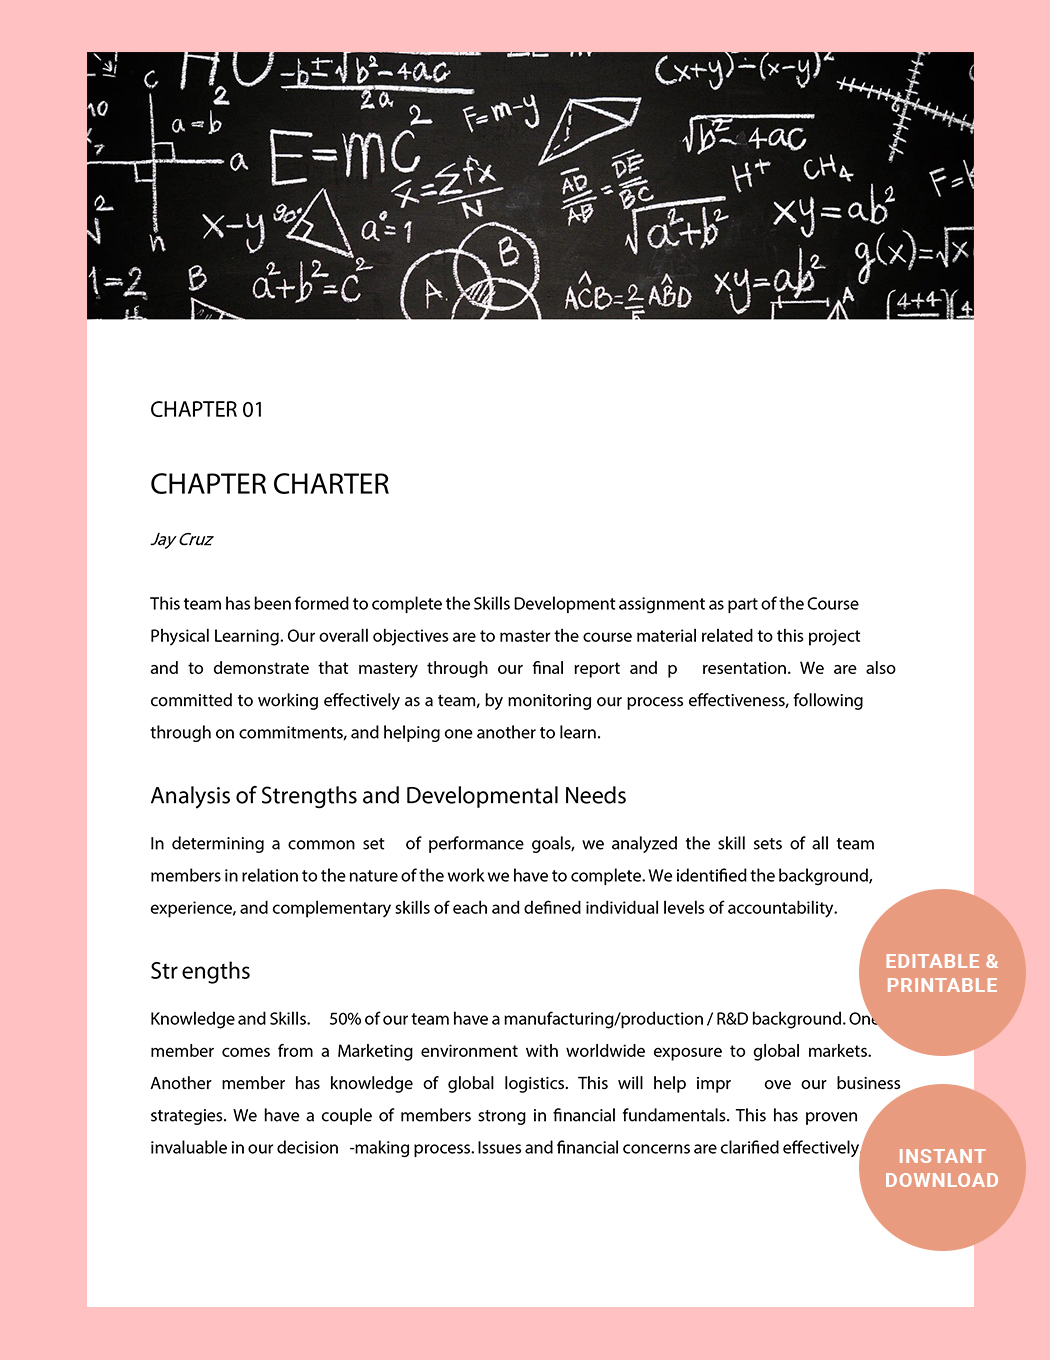 Chapter Charter Template